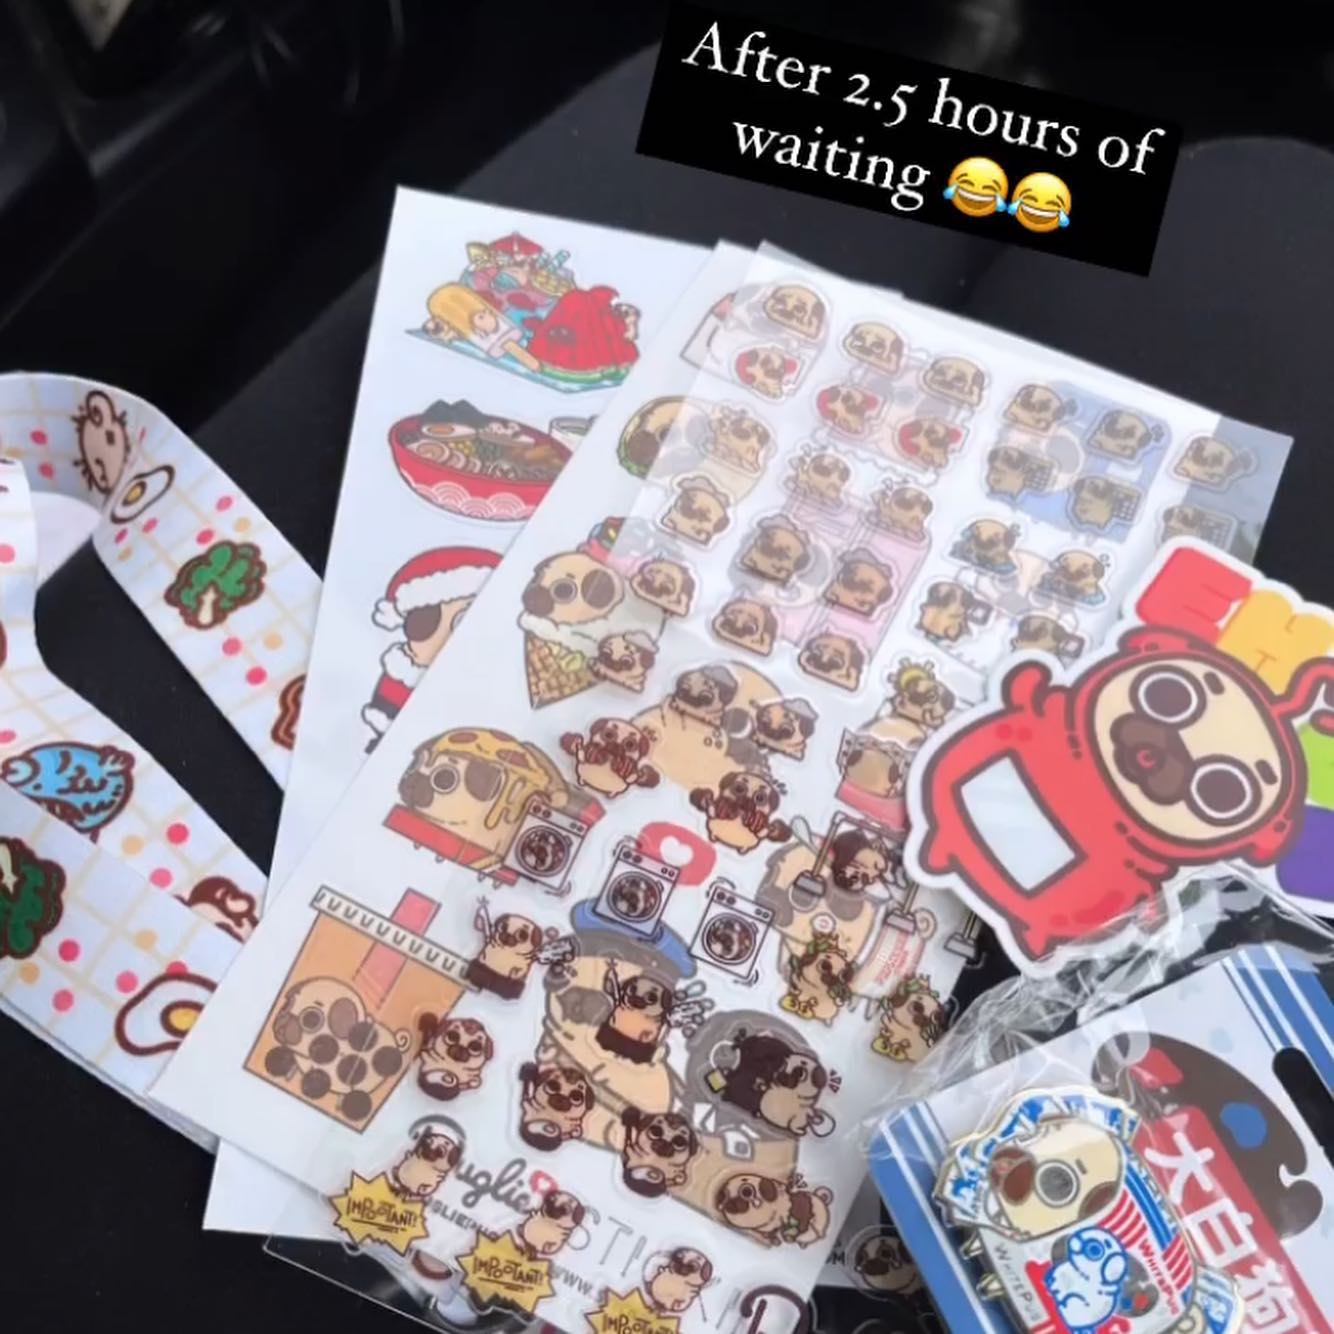 Photo of some Puglie stickers and lanyards a customer bought, caption says “After 2.5 hours of waiting.”